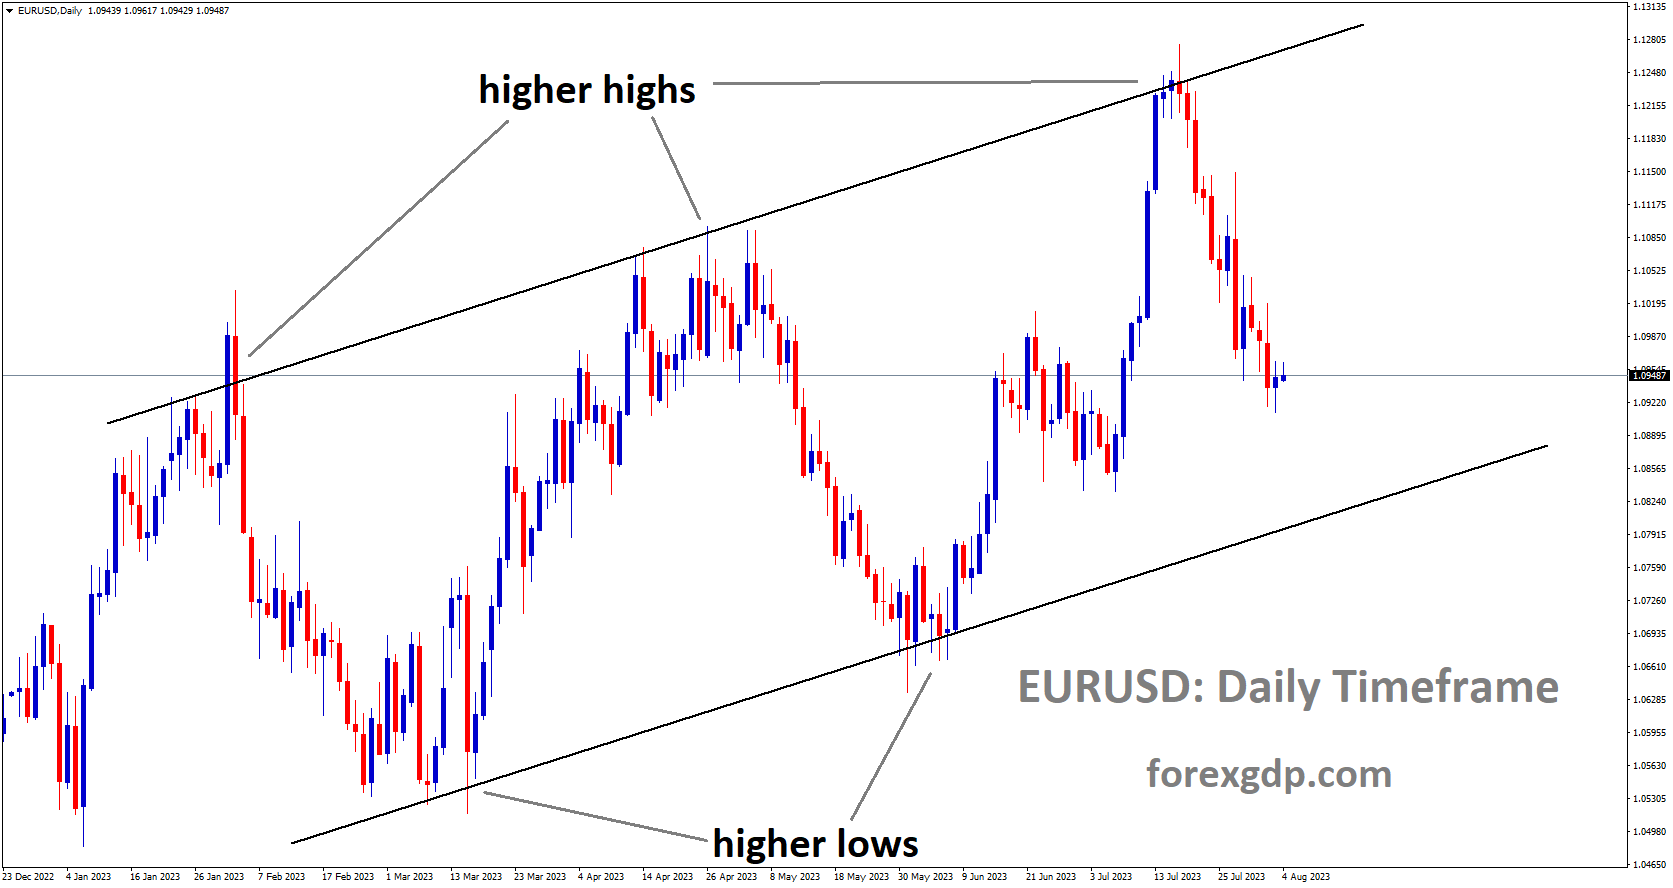 EURUSD is moving in a ascending channel and the market has fallen from the higher high area of the channel